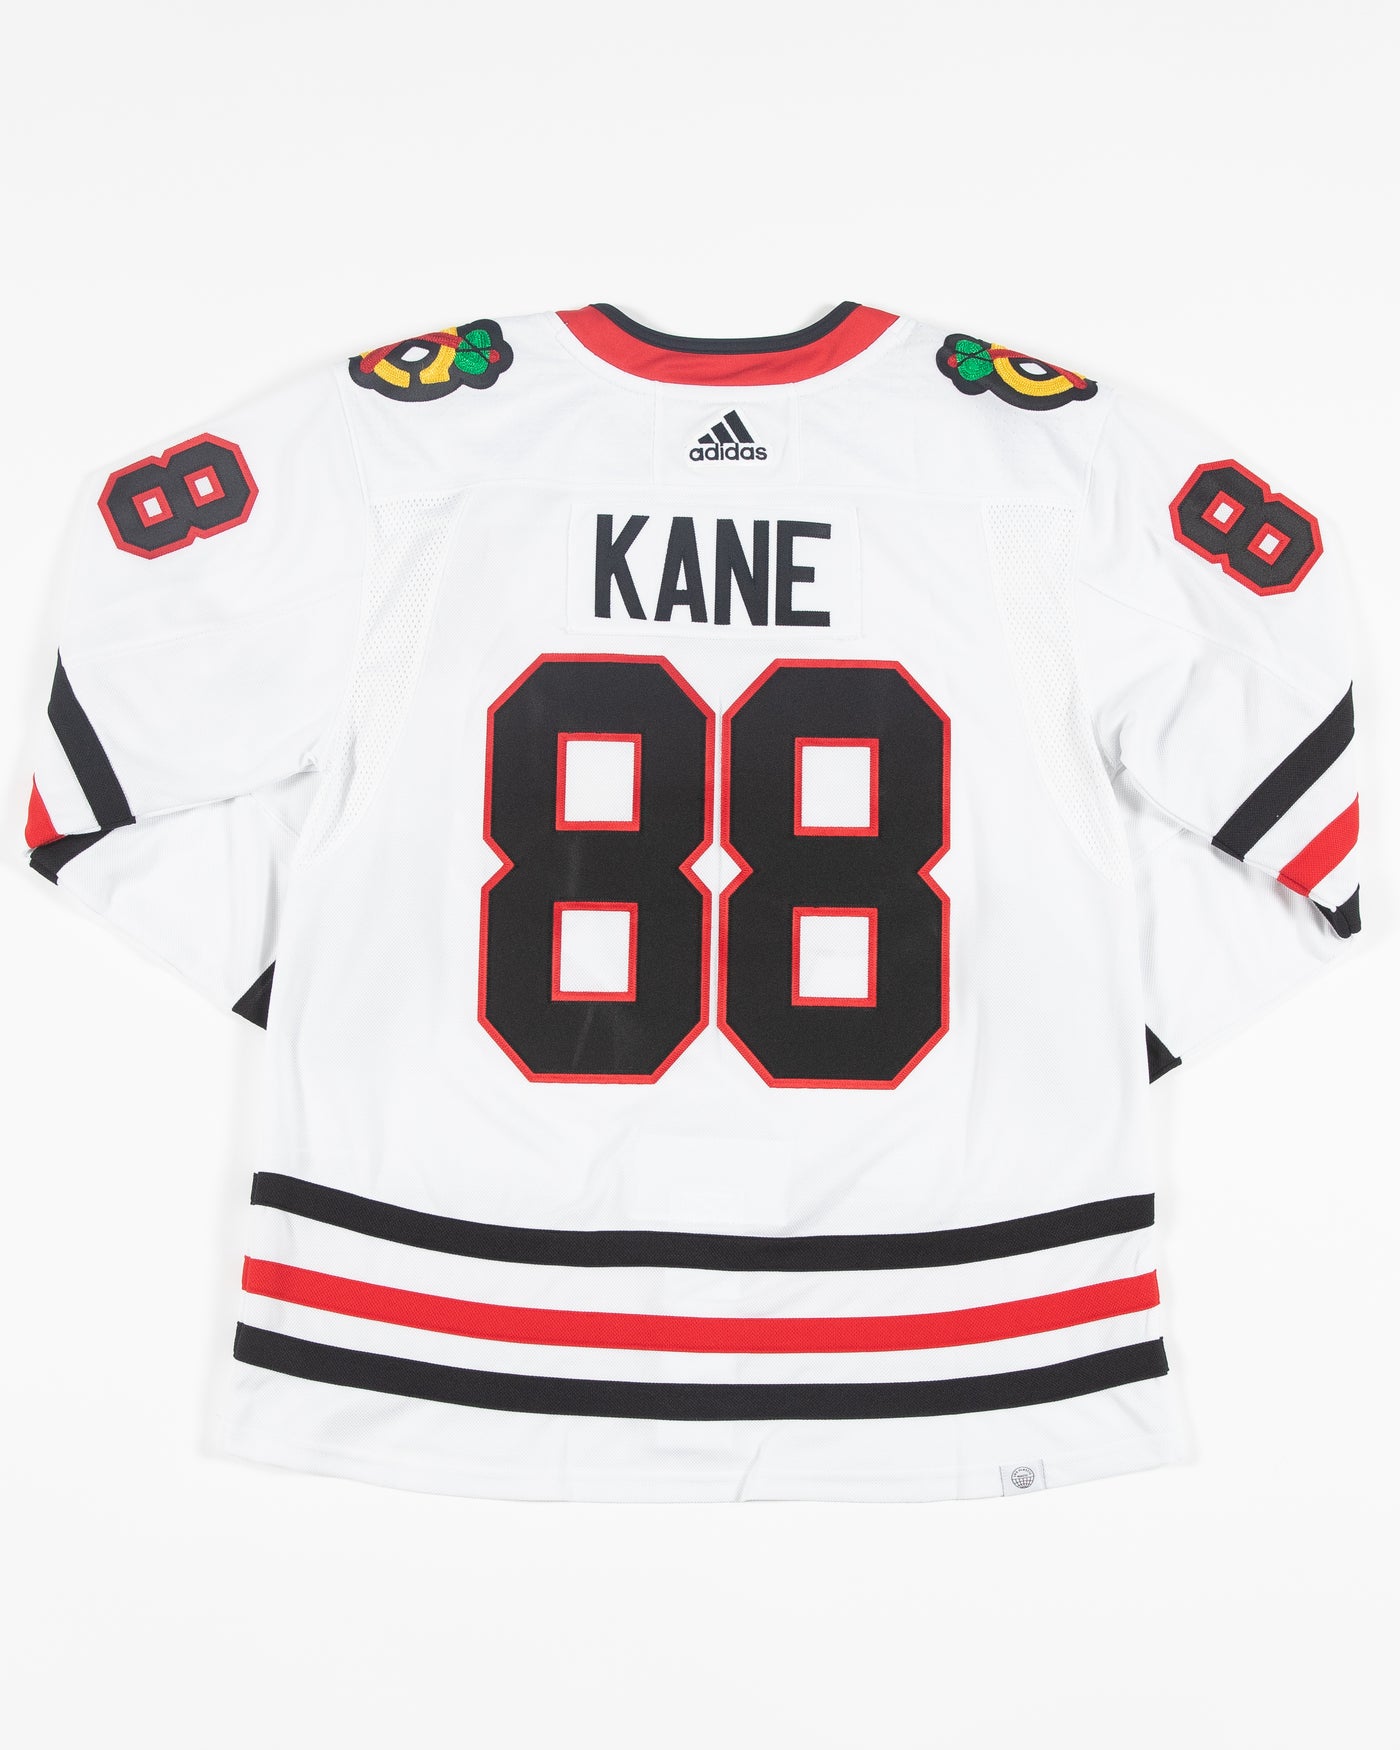 NHL Chicago Blackhawks Jersey With Fight Strap Embroidered -  Denmark